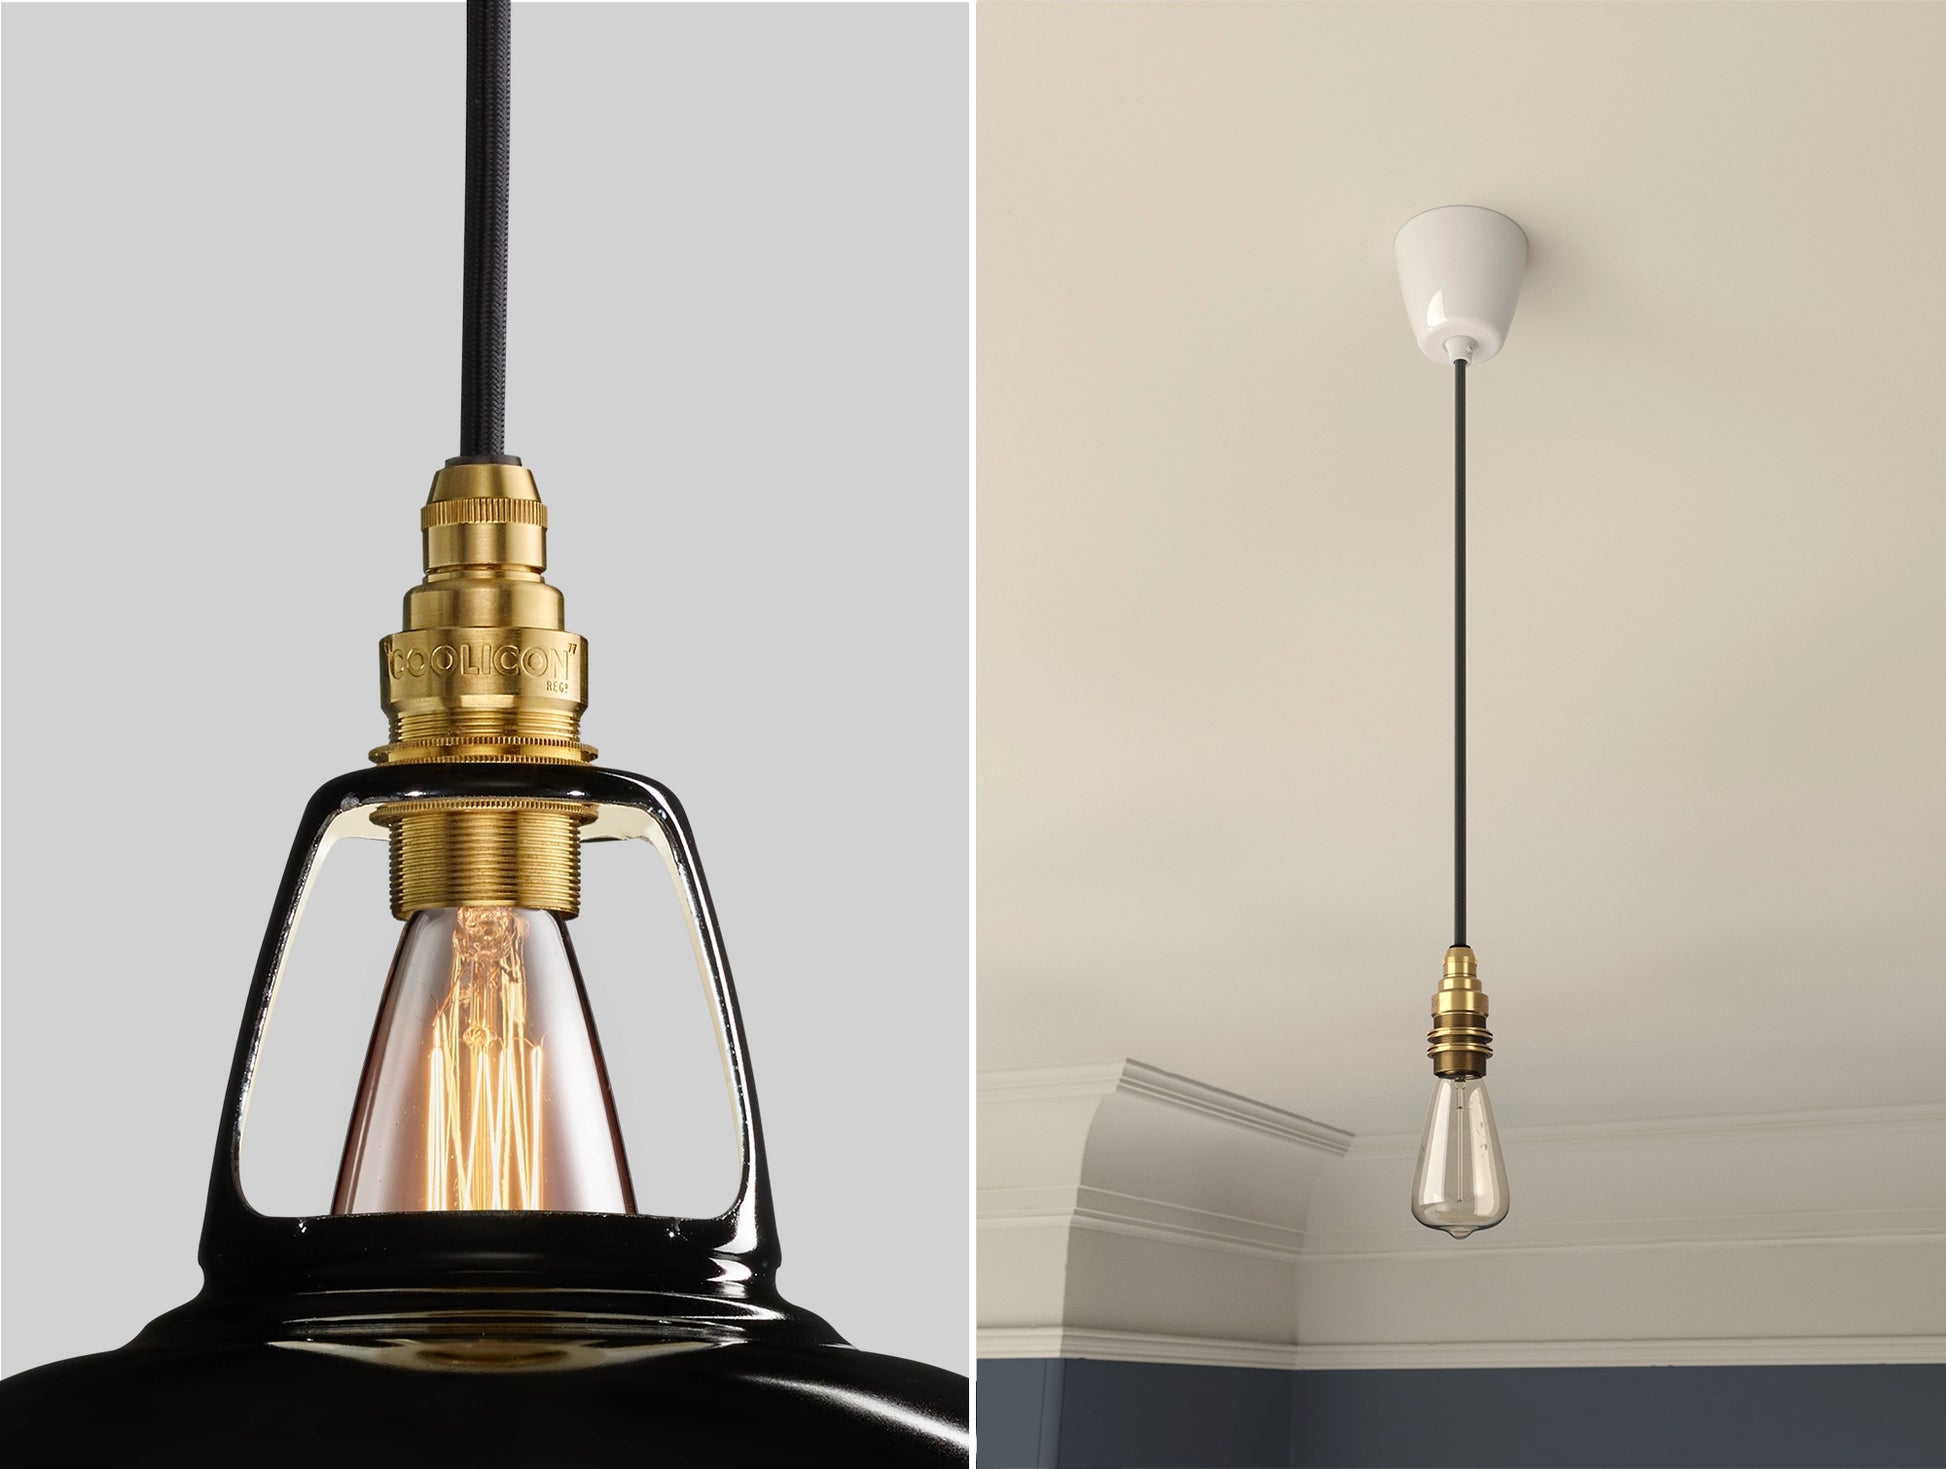 Close up of an E14 Brass suspension set on a Jet Black shade on the left. On the right, an E14 Brass pendant set with a lightbulb is hanging from the ceiling 